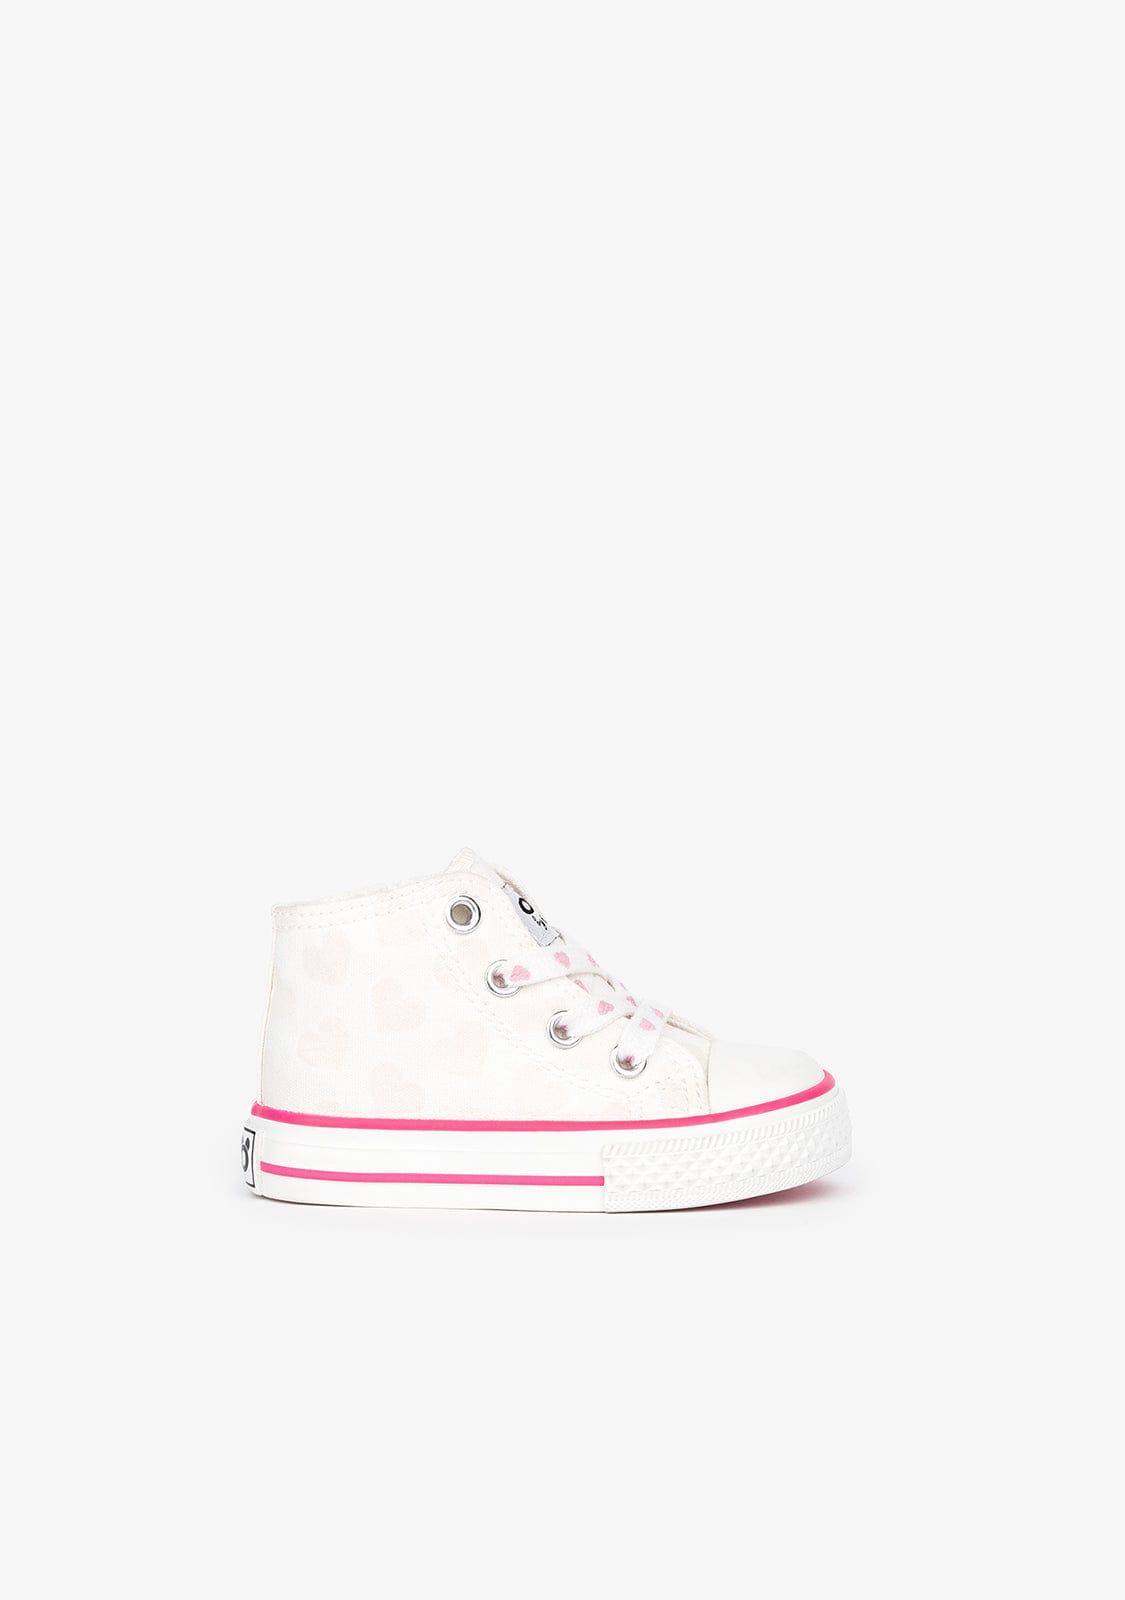 OSITO Shoes Baby's White Sunlight Hi-Top Sneaker